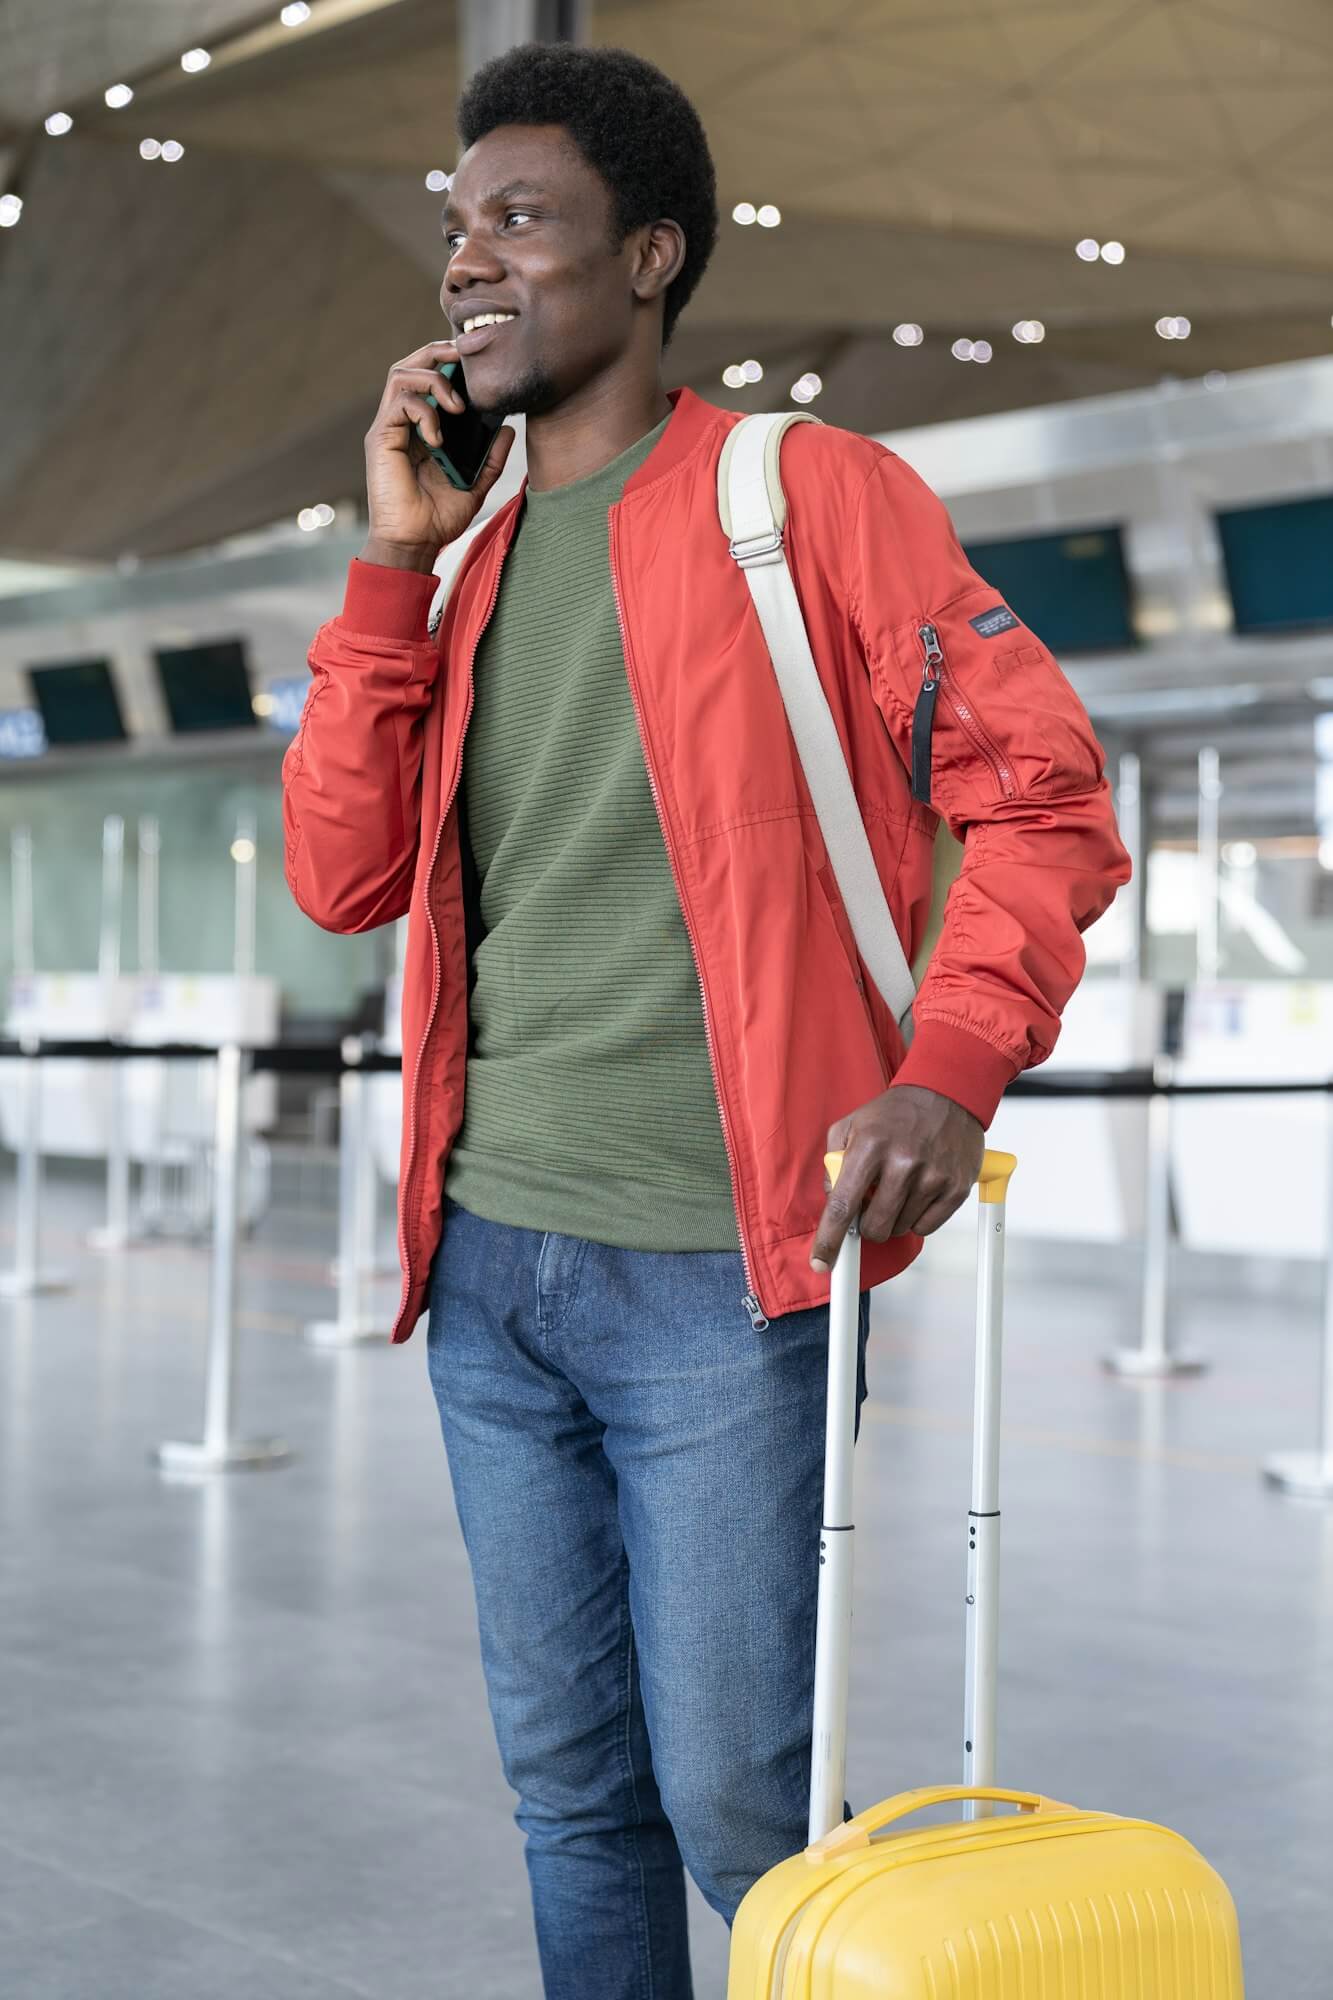 African man talk on phone calling buffalo airport taxi arriving in airport, travel to Canada vacation